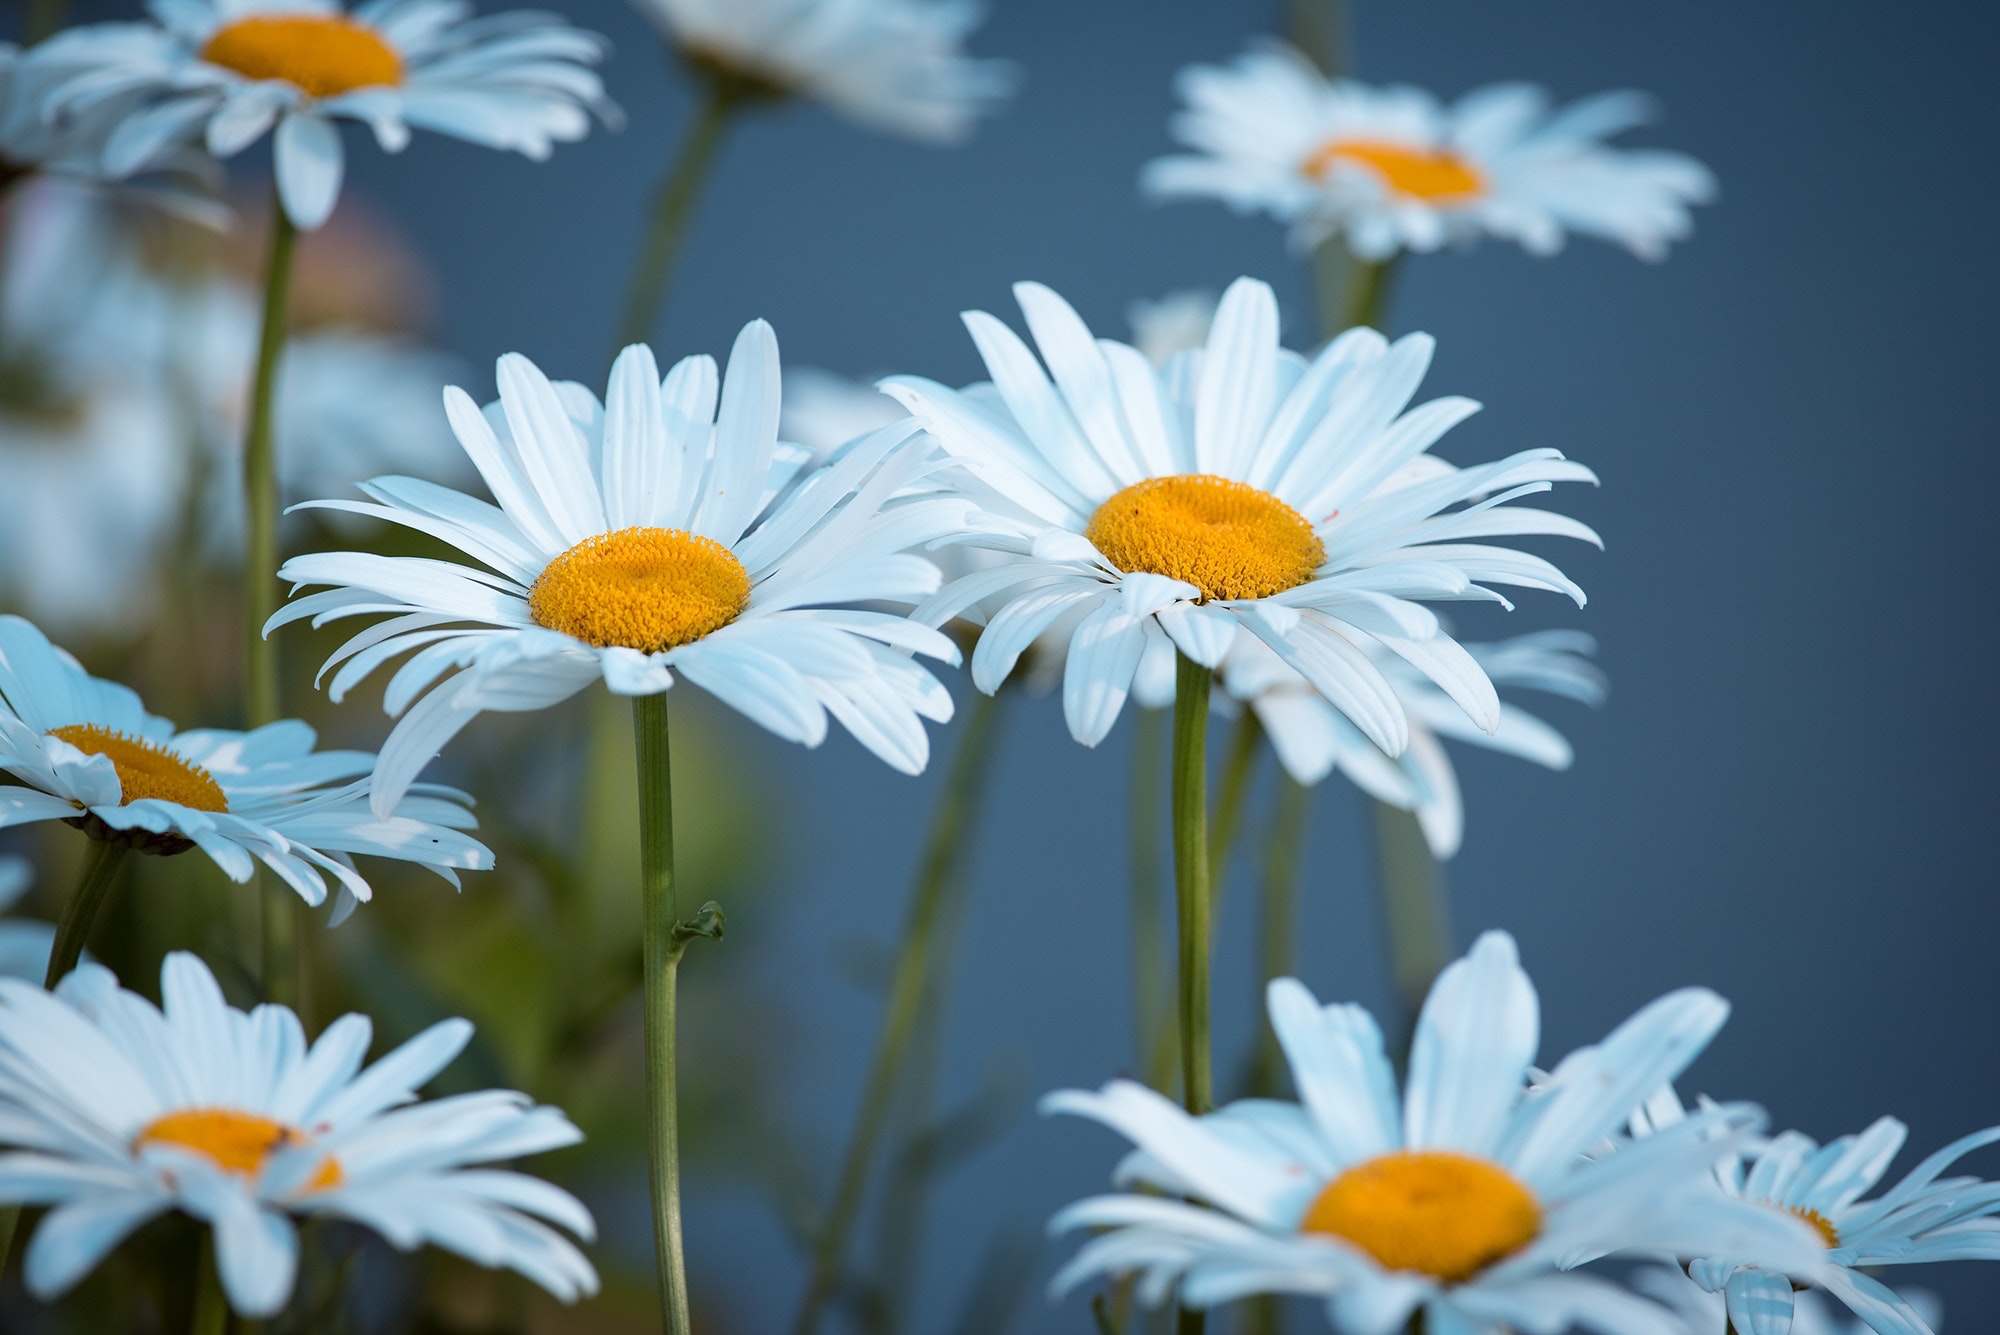 Close up photography of daisies